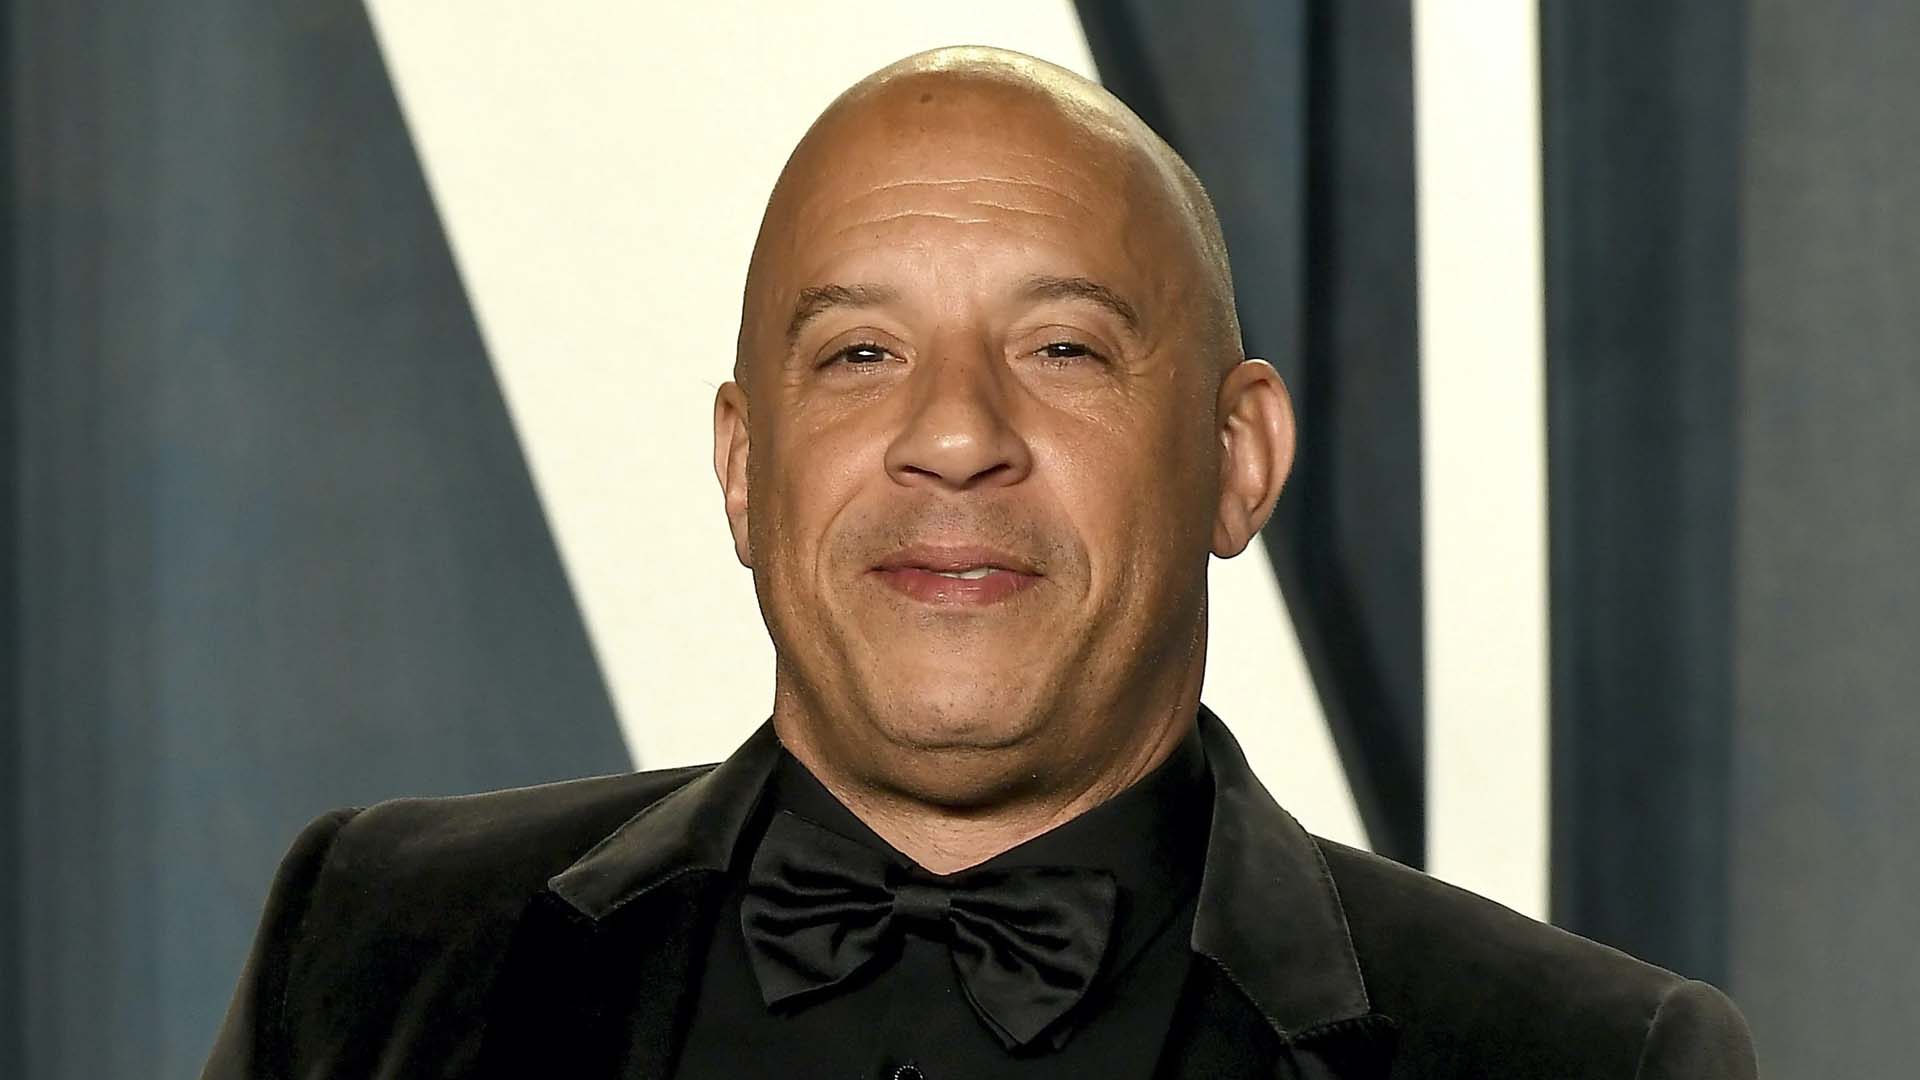 How Many Siblings Does Vin Diesel Have? What Do They Do?